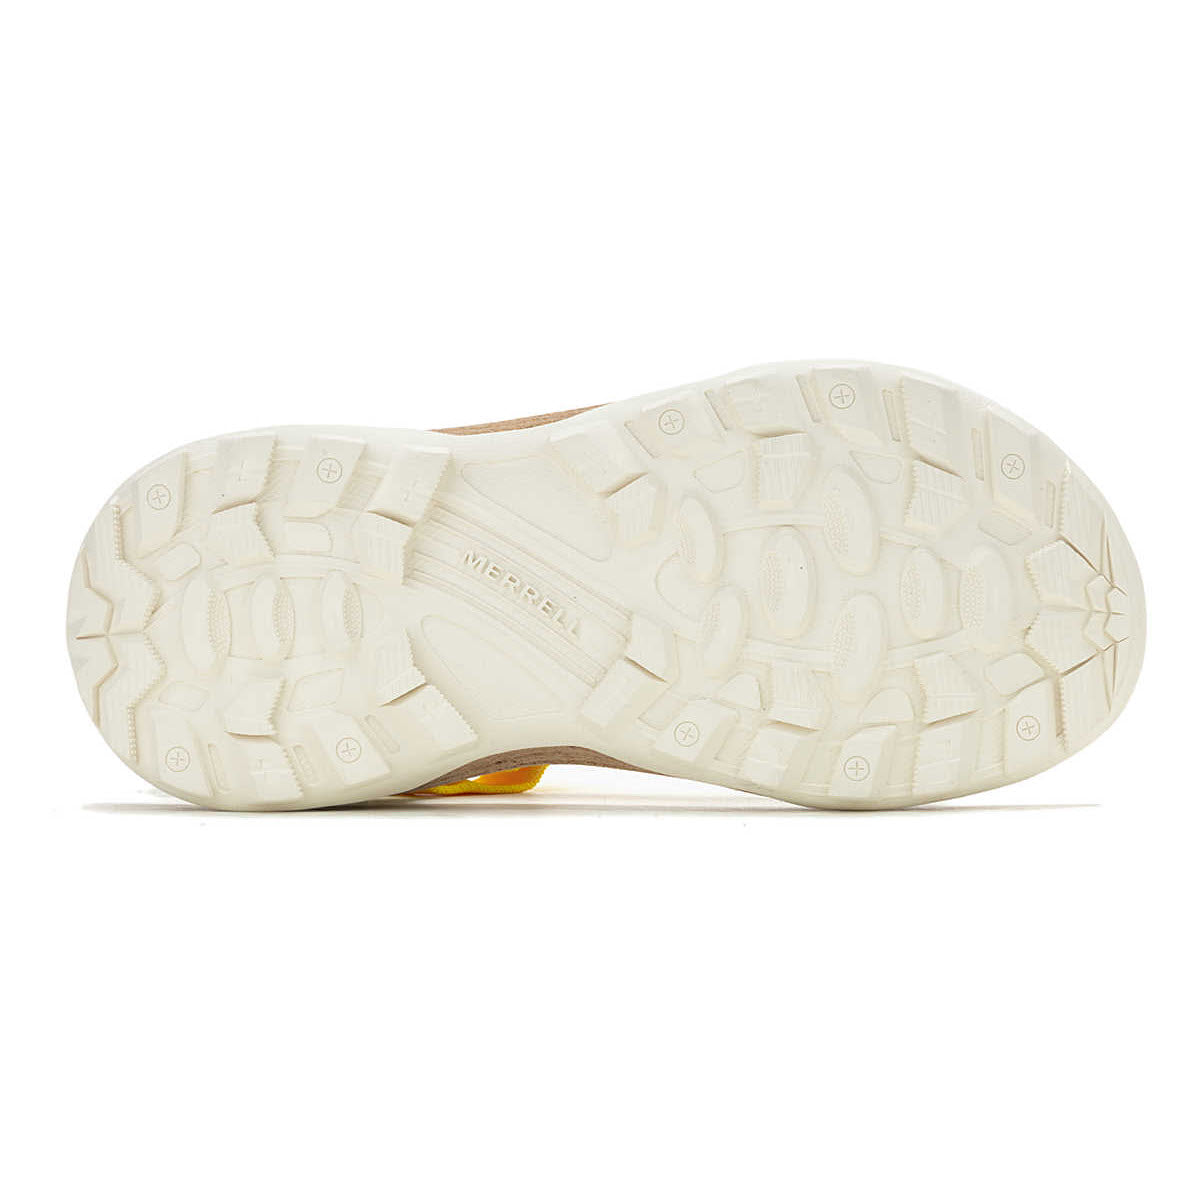 Sole of a Merrell sneaker showing the textured tread pattern and recycled laces.